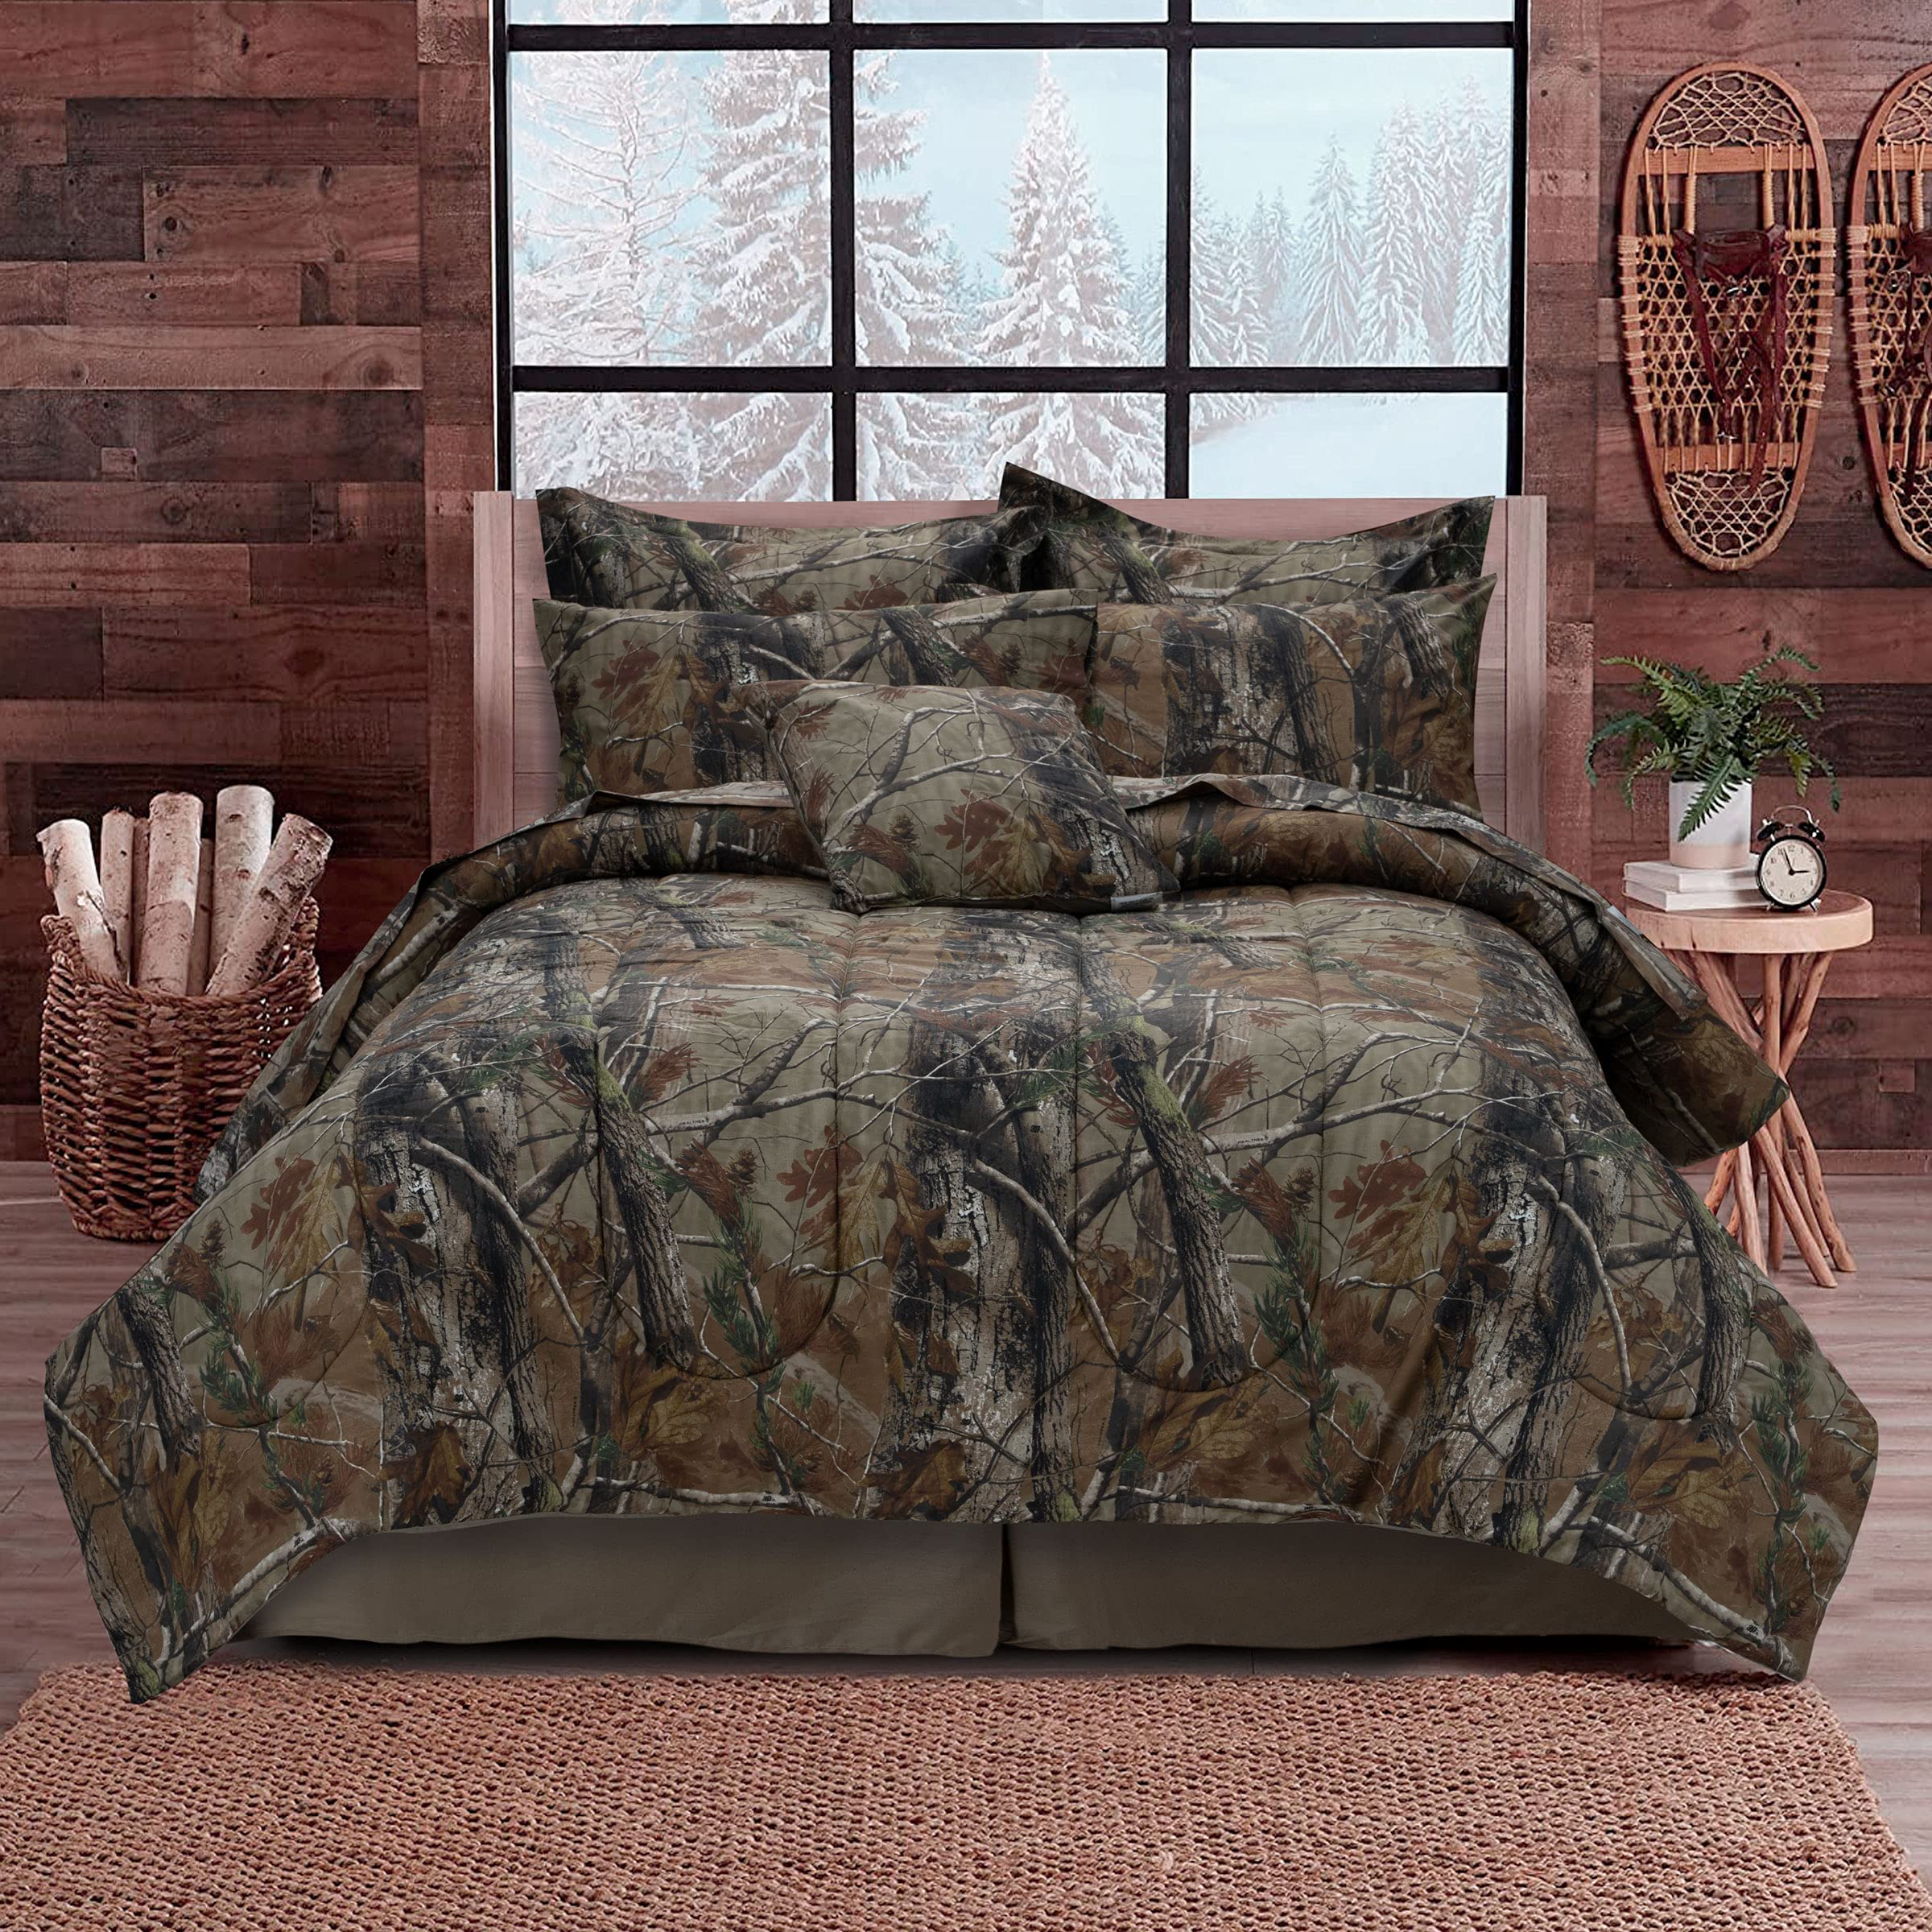 Book Cover Realtree All Purpose Camo Bedding, Polycotton Fabric 4-Piece Comforter Set for Bedroom, Hunting & Outdoor (Full), Camoflauge Full Camoflauge